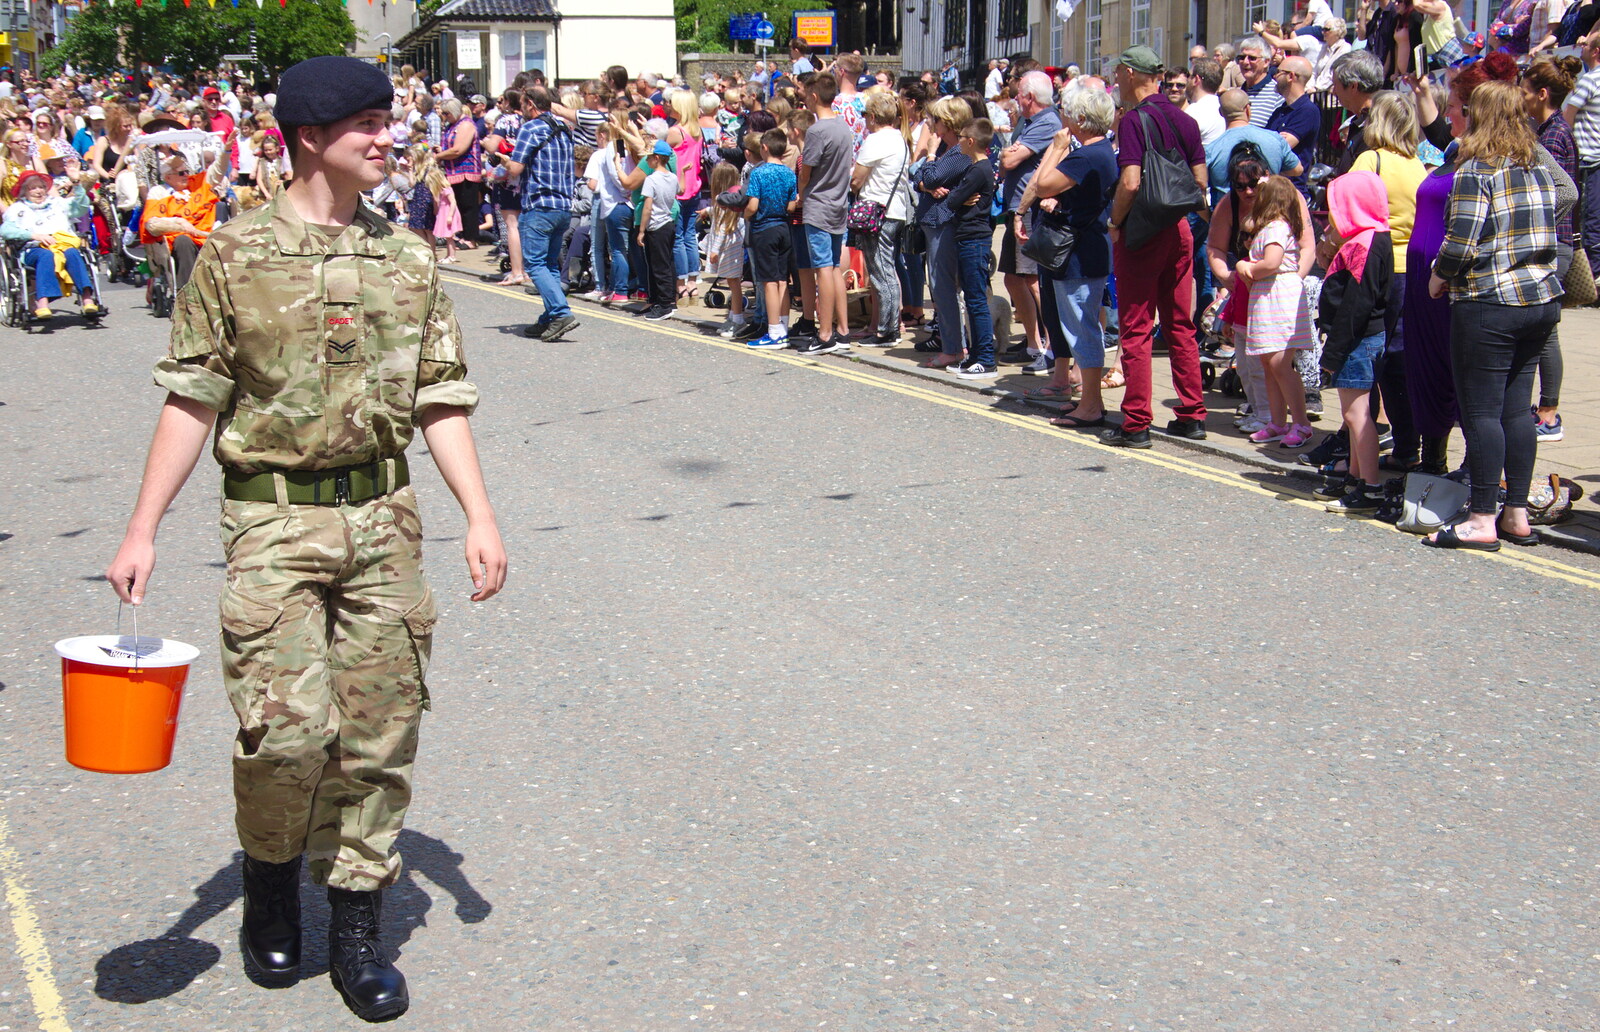 An army cadet with a collecting bucket from The Diss Carnival 2019, Diss, Norfolk - 9th June 2019